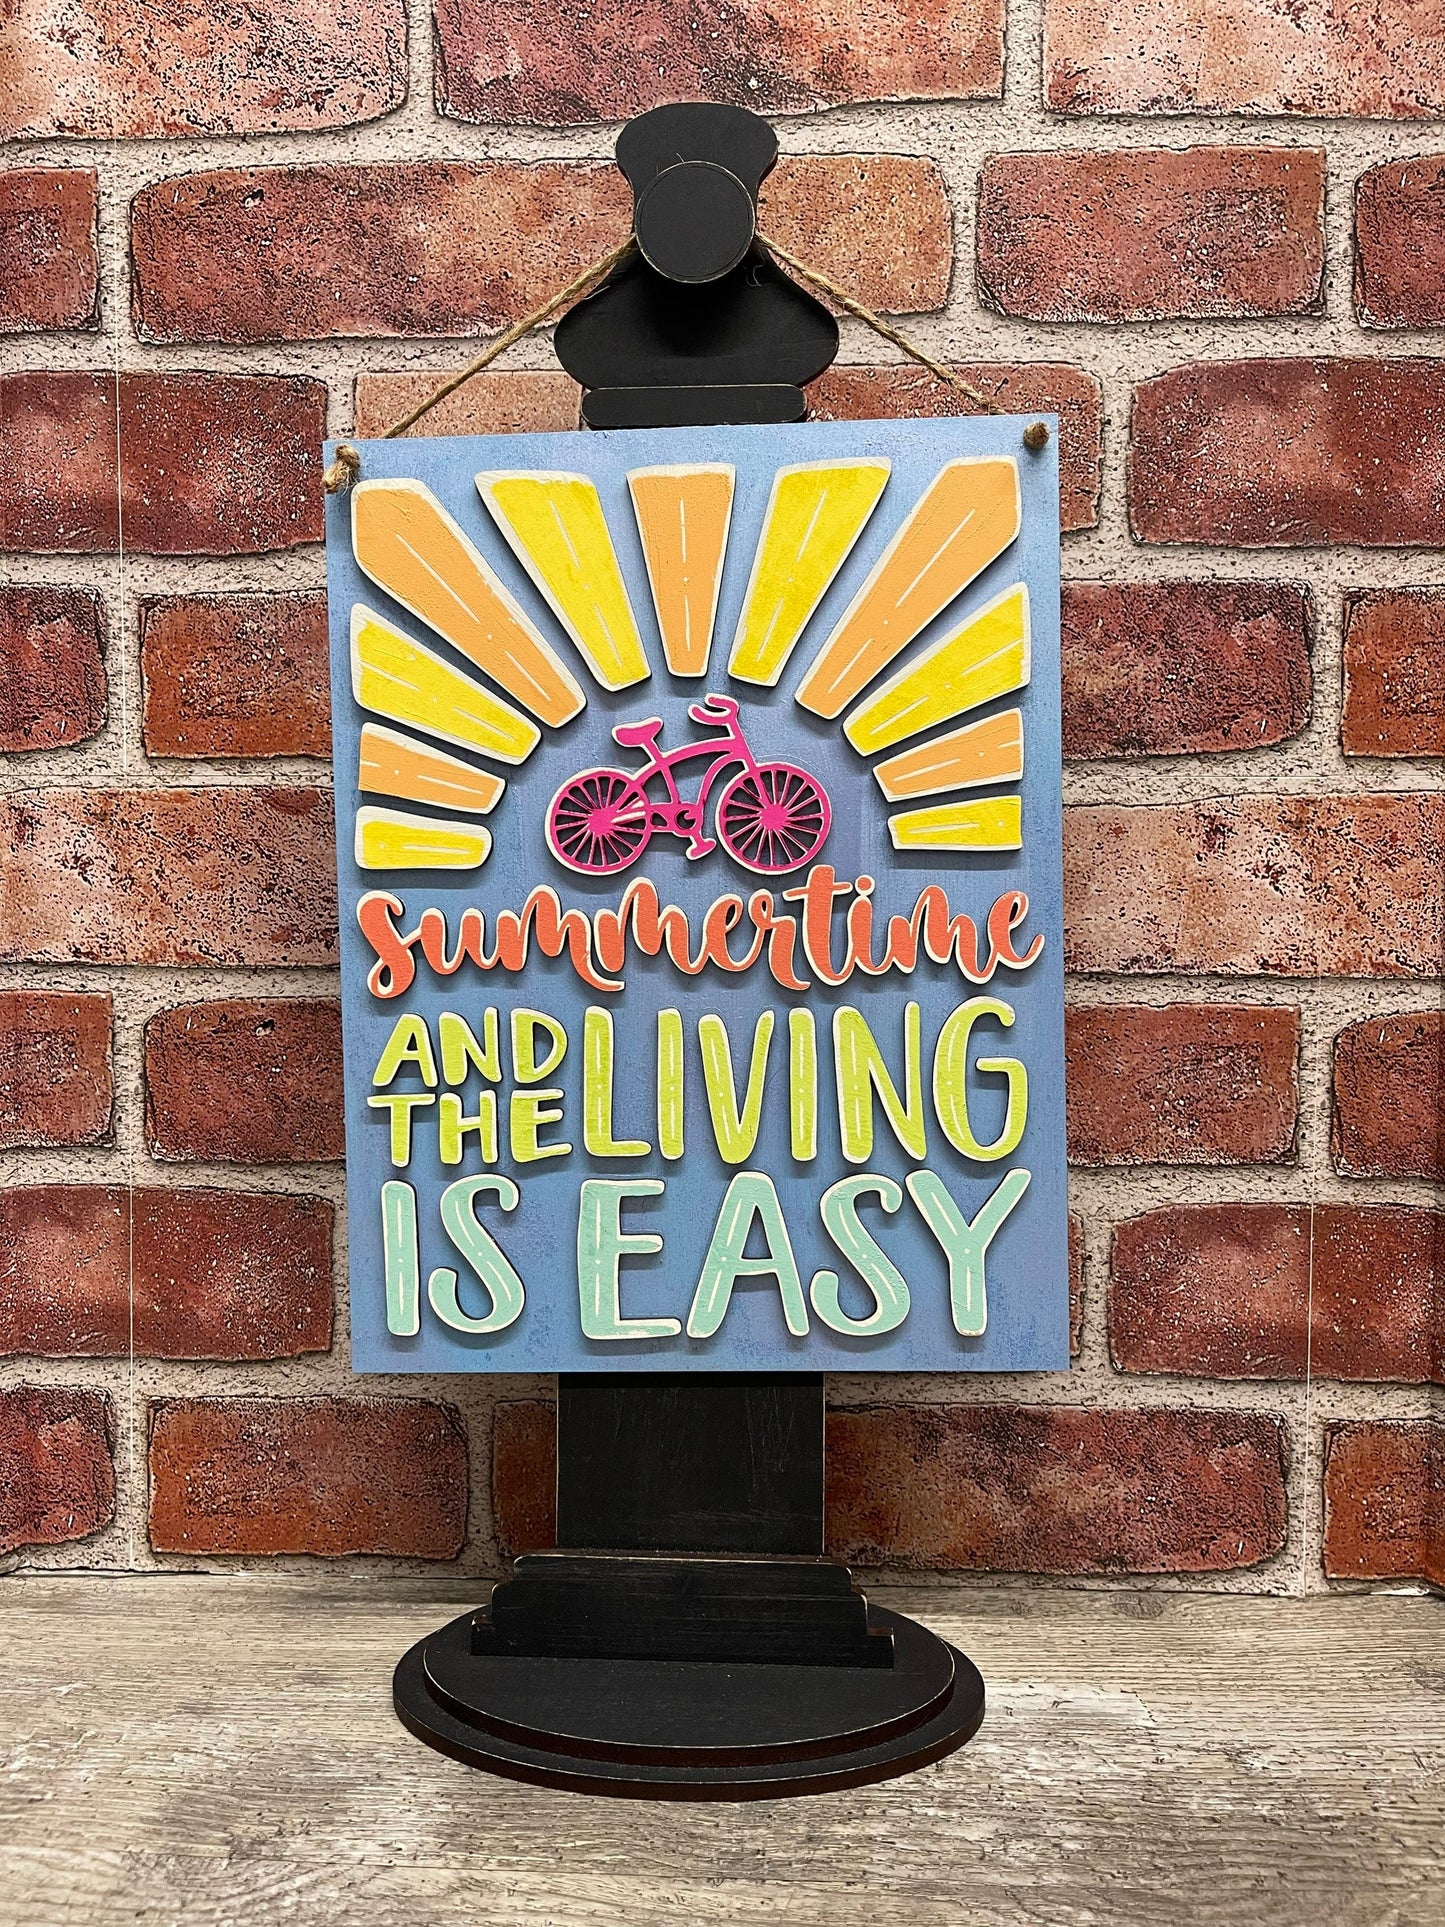 Summertime and the living is easy sign kit cutouts - unpainted wooden cutouts, ready for you to paint